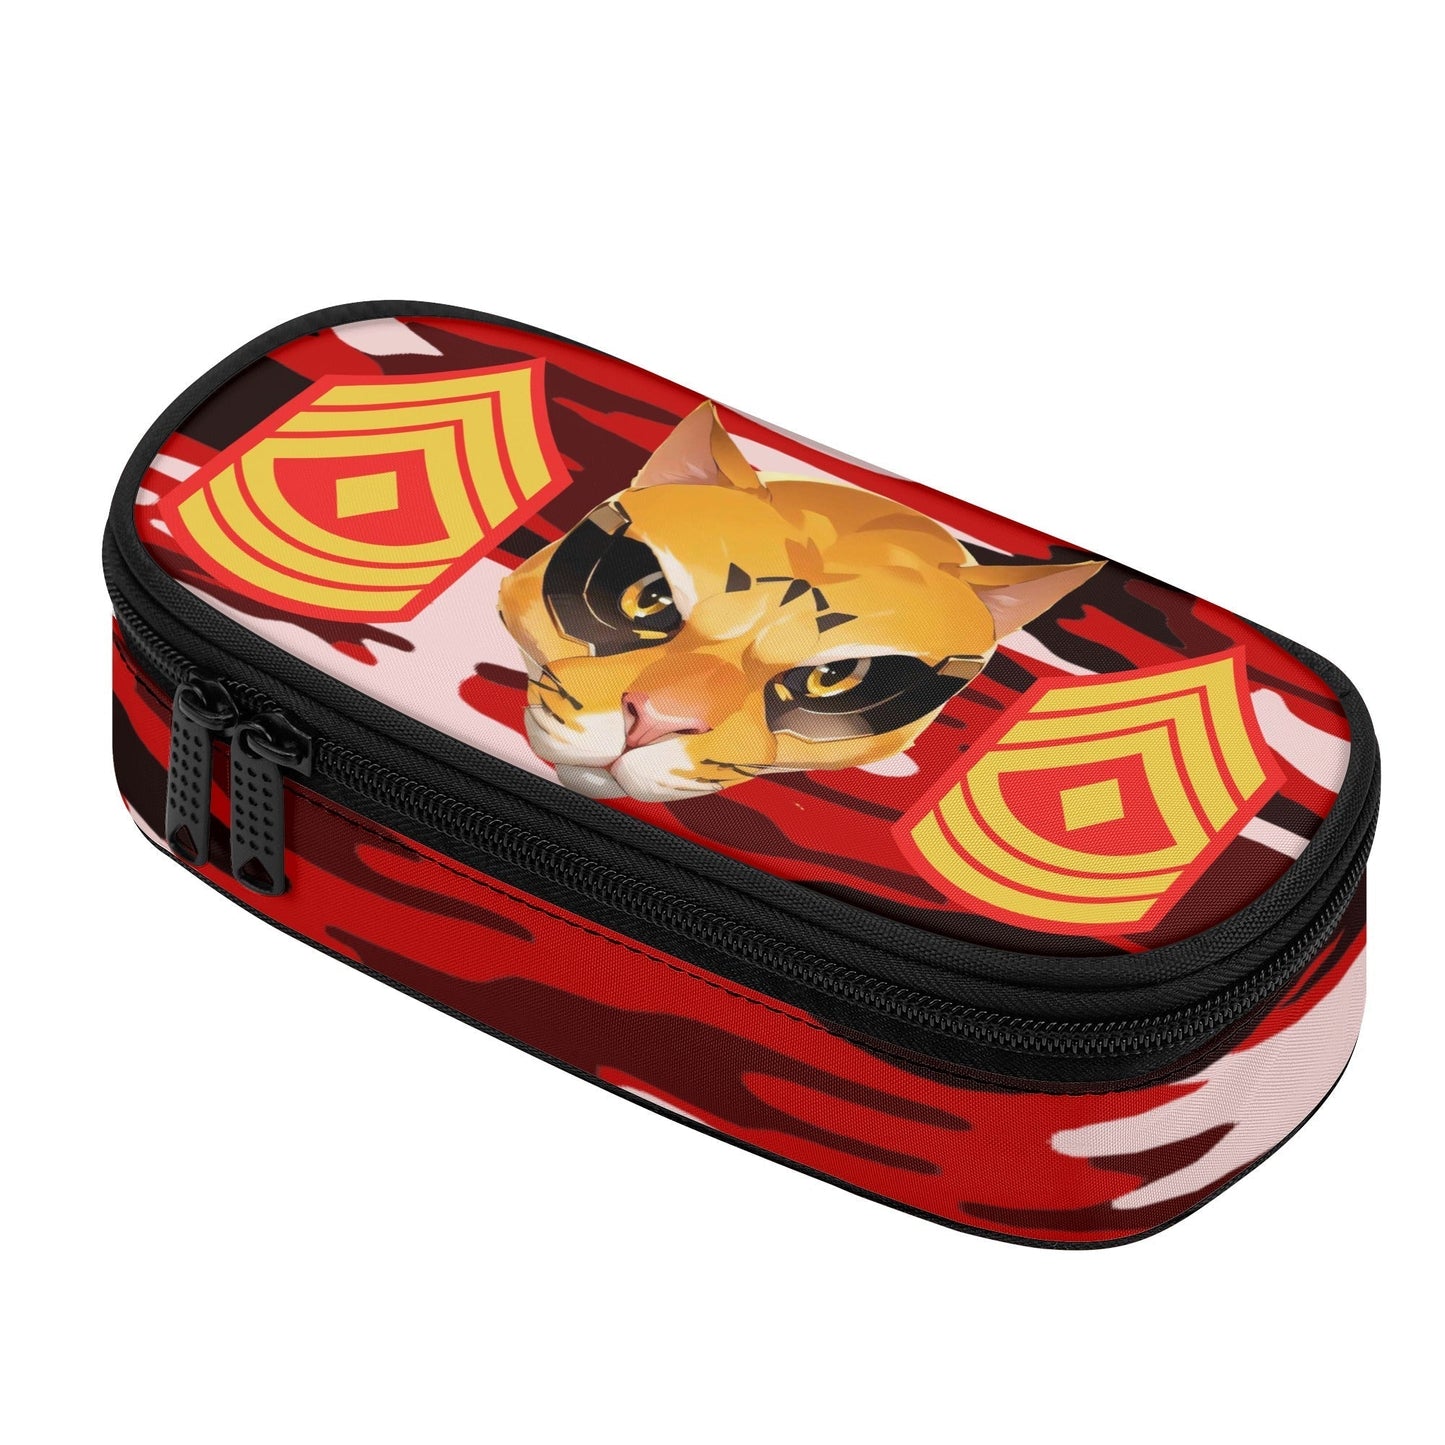 Stand out  with the  Nugget Army 3-Layer Pencil Case  available at Hey Nugget. Grab yours today!